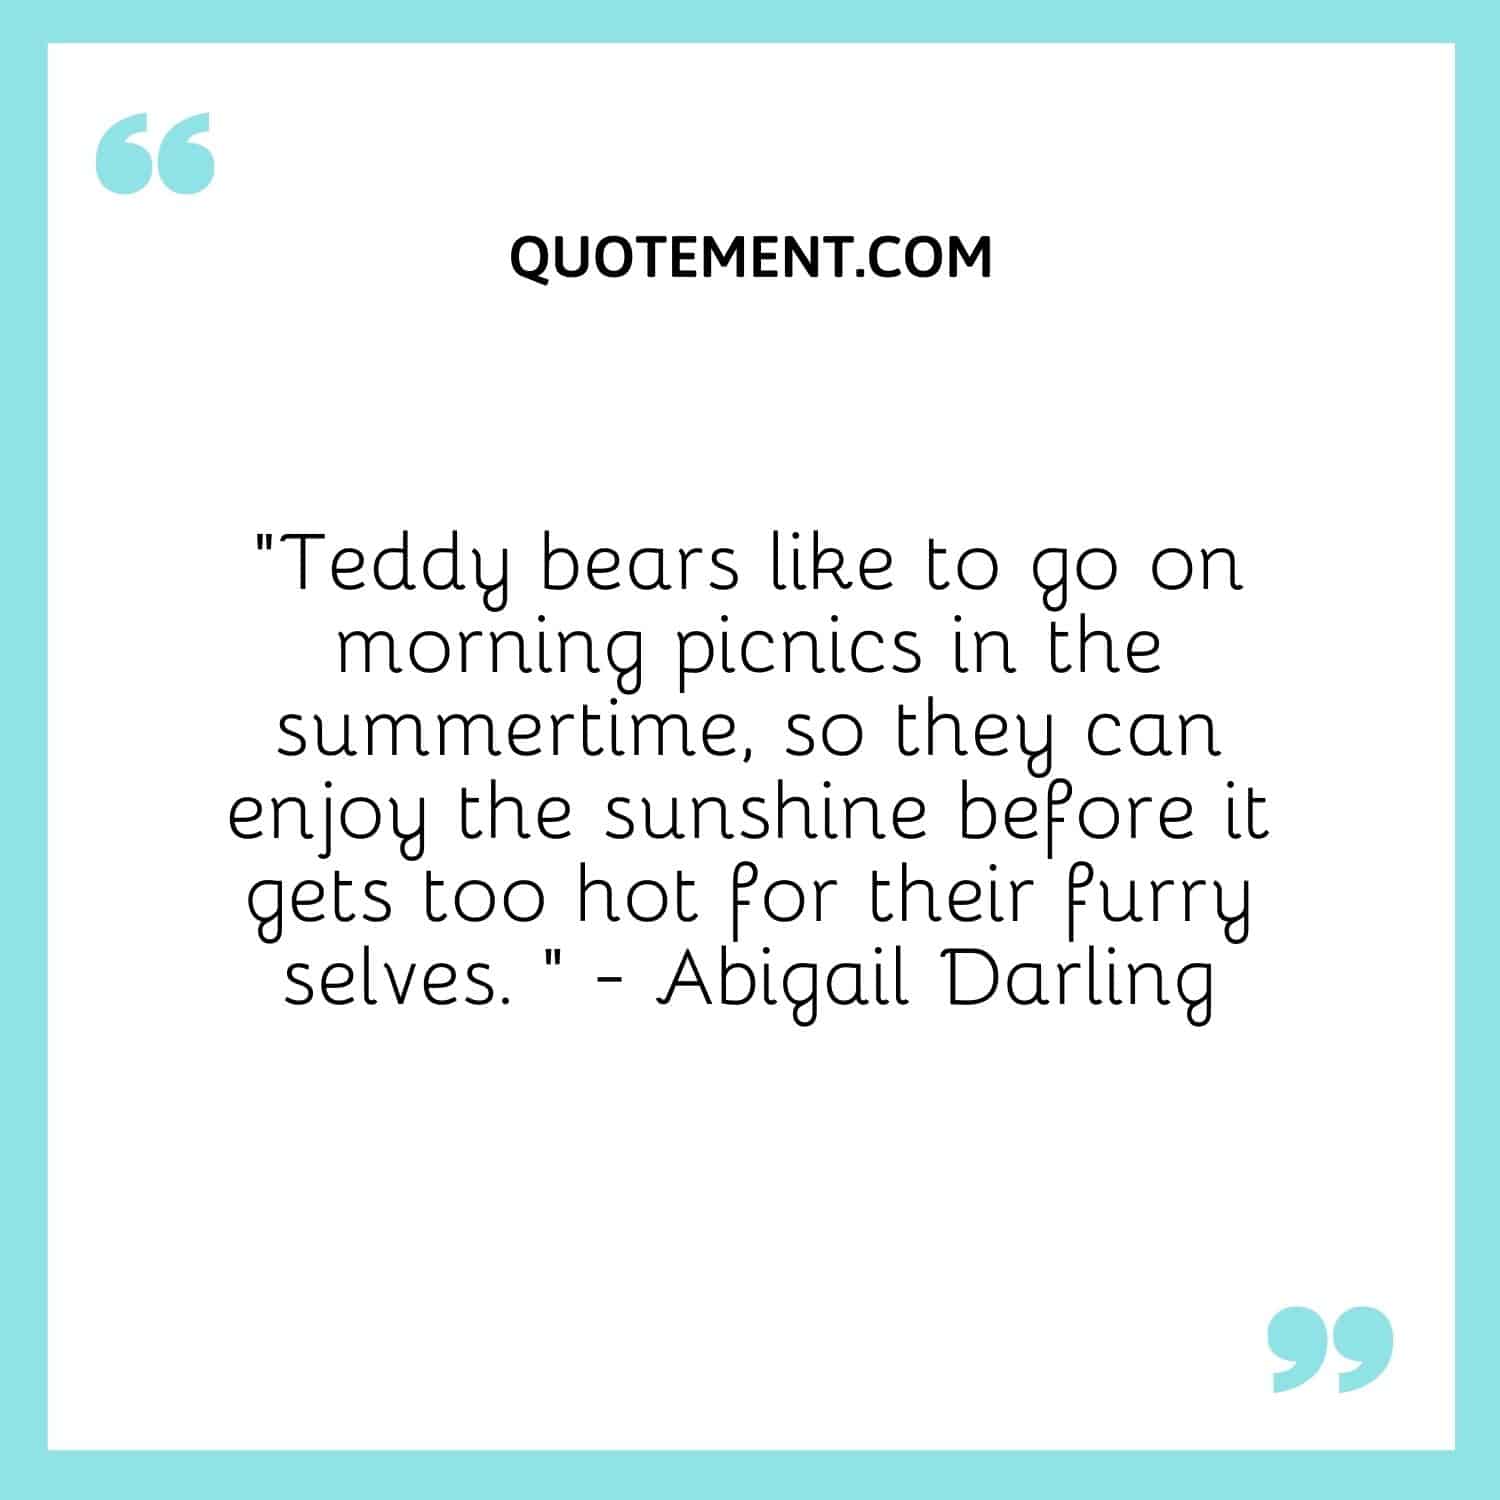 Teddy bears like to go on morning picnics in the summertime